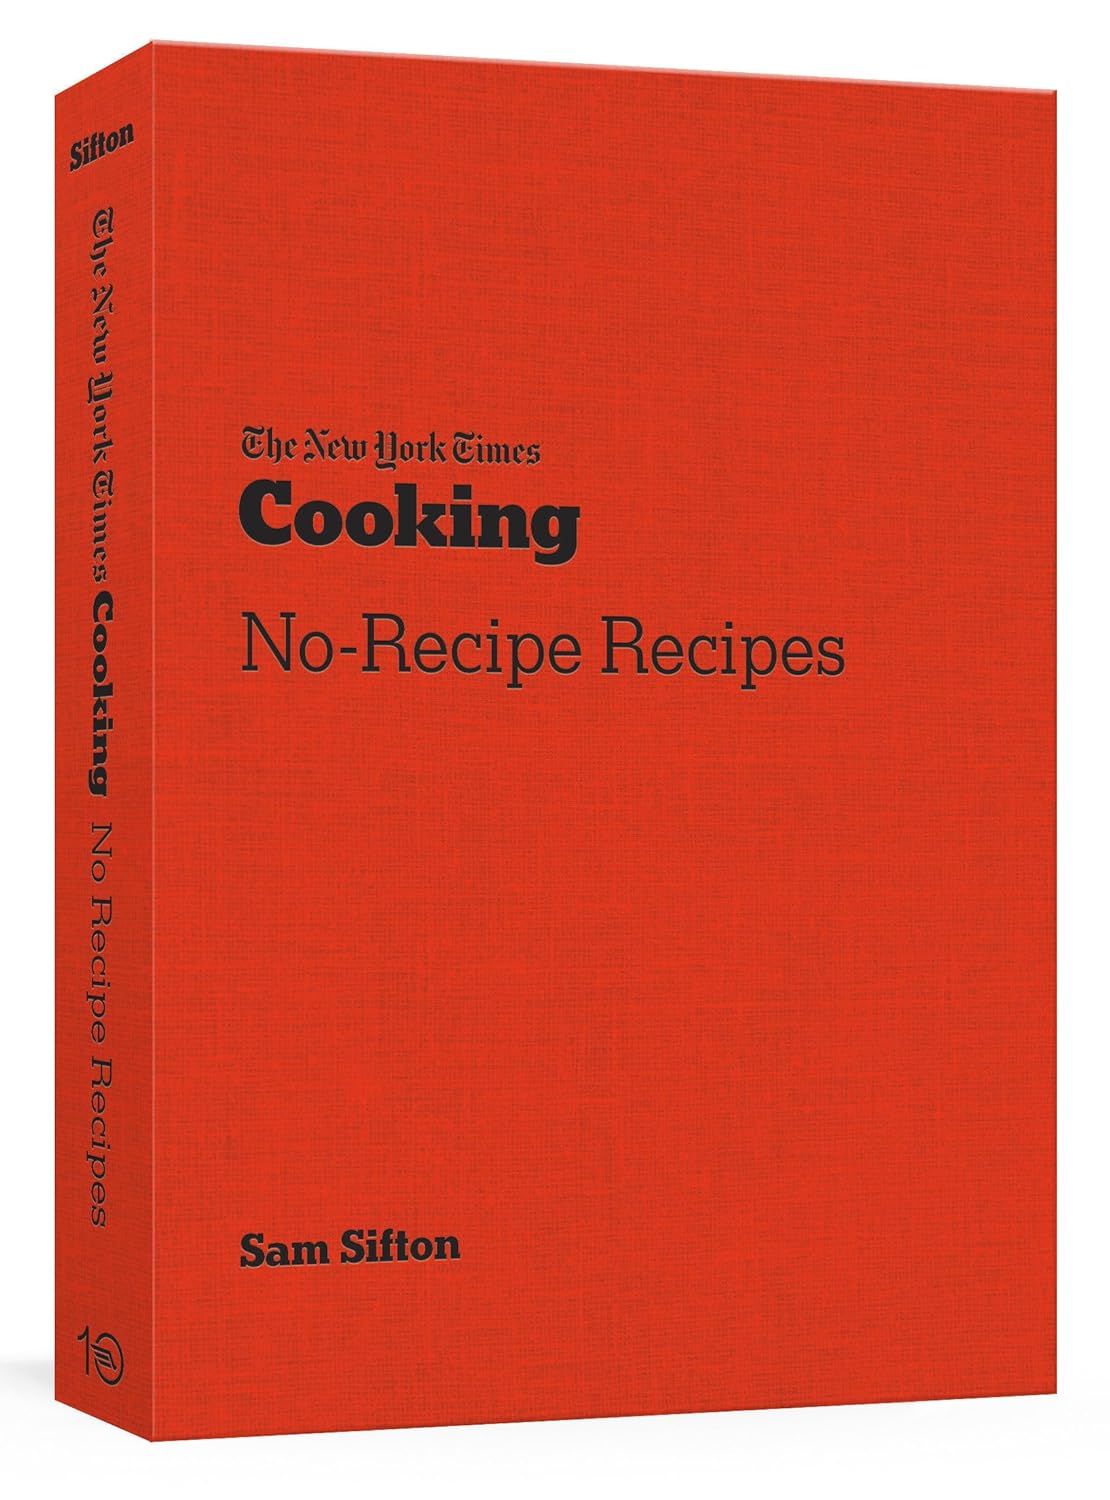 The New York Times Cooking No-Recipe Recipes: [A Cookbook]     Paperback – March 16, 2021